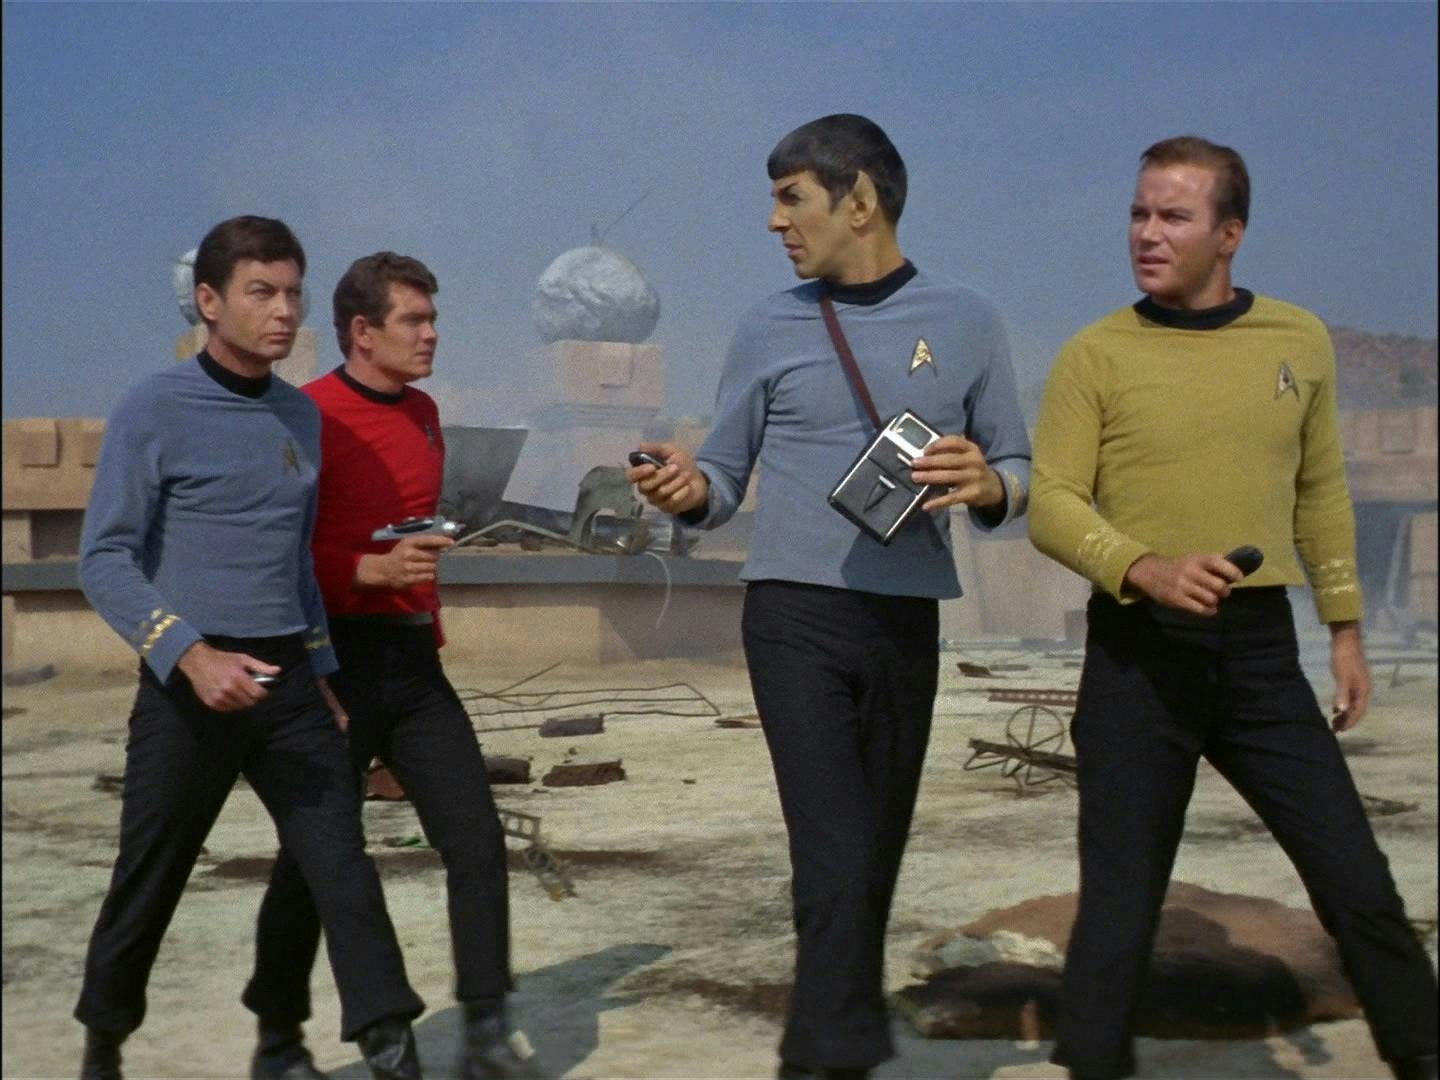 Kirk, Spock, McCoy, and a redshirt wearing officer explore the planet's surface.